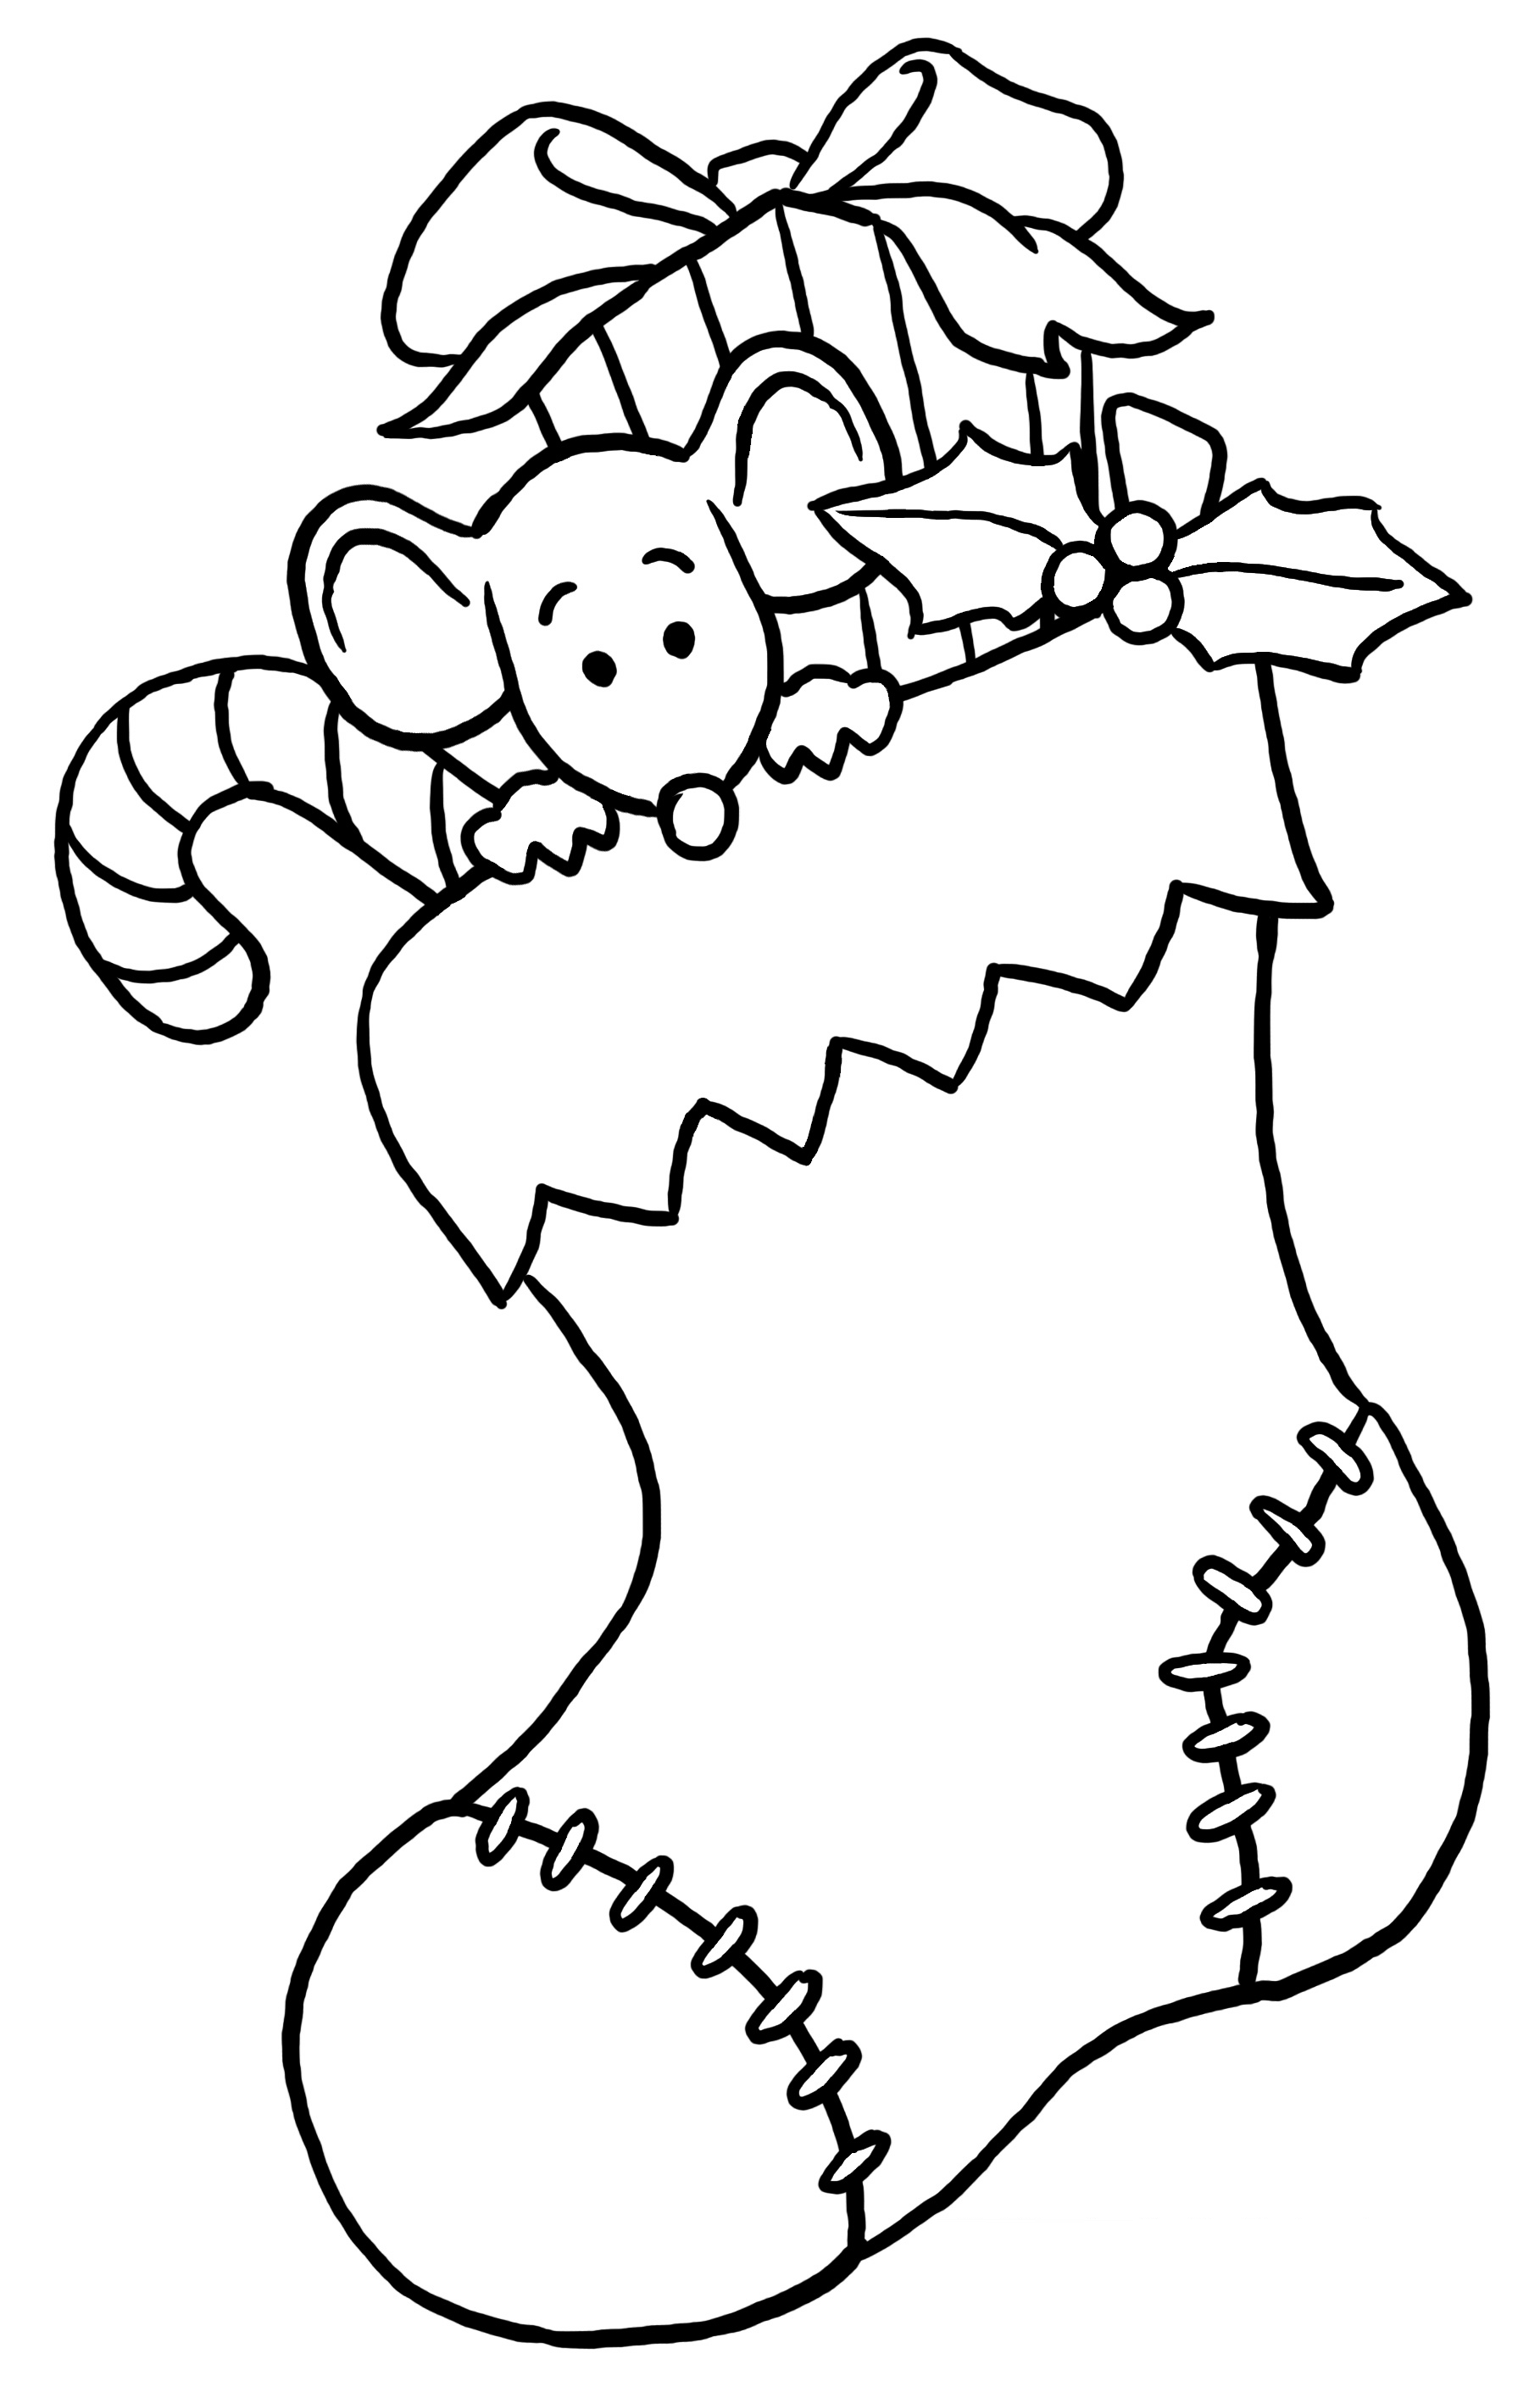 Christmas Fun Coloring Pages Free Printable Download | Coloring ...